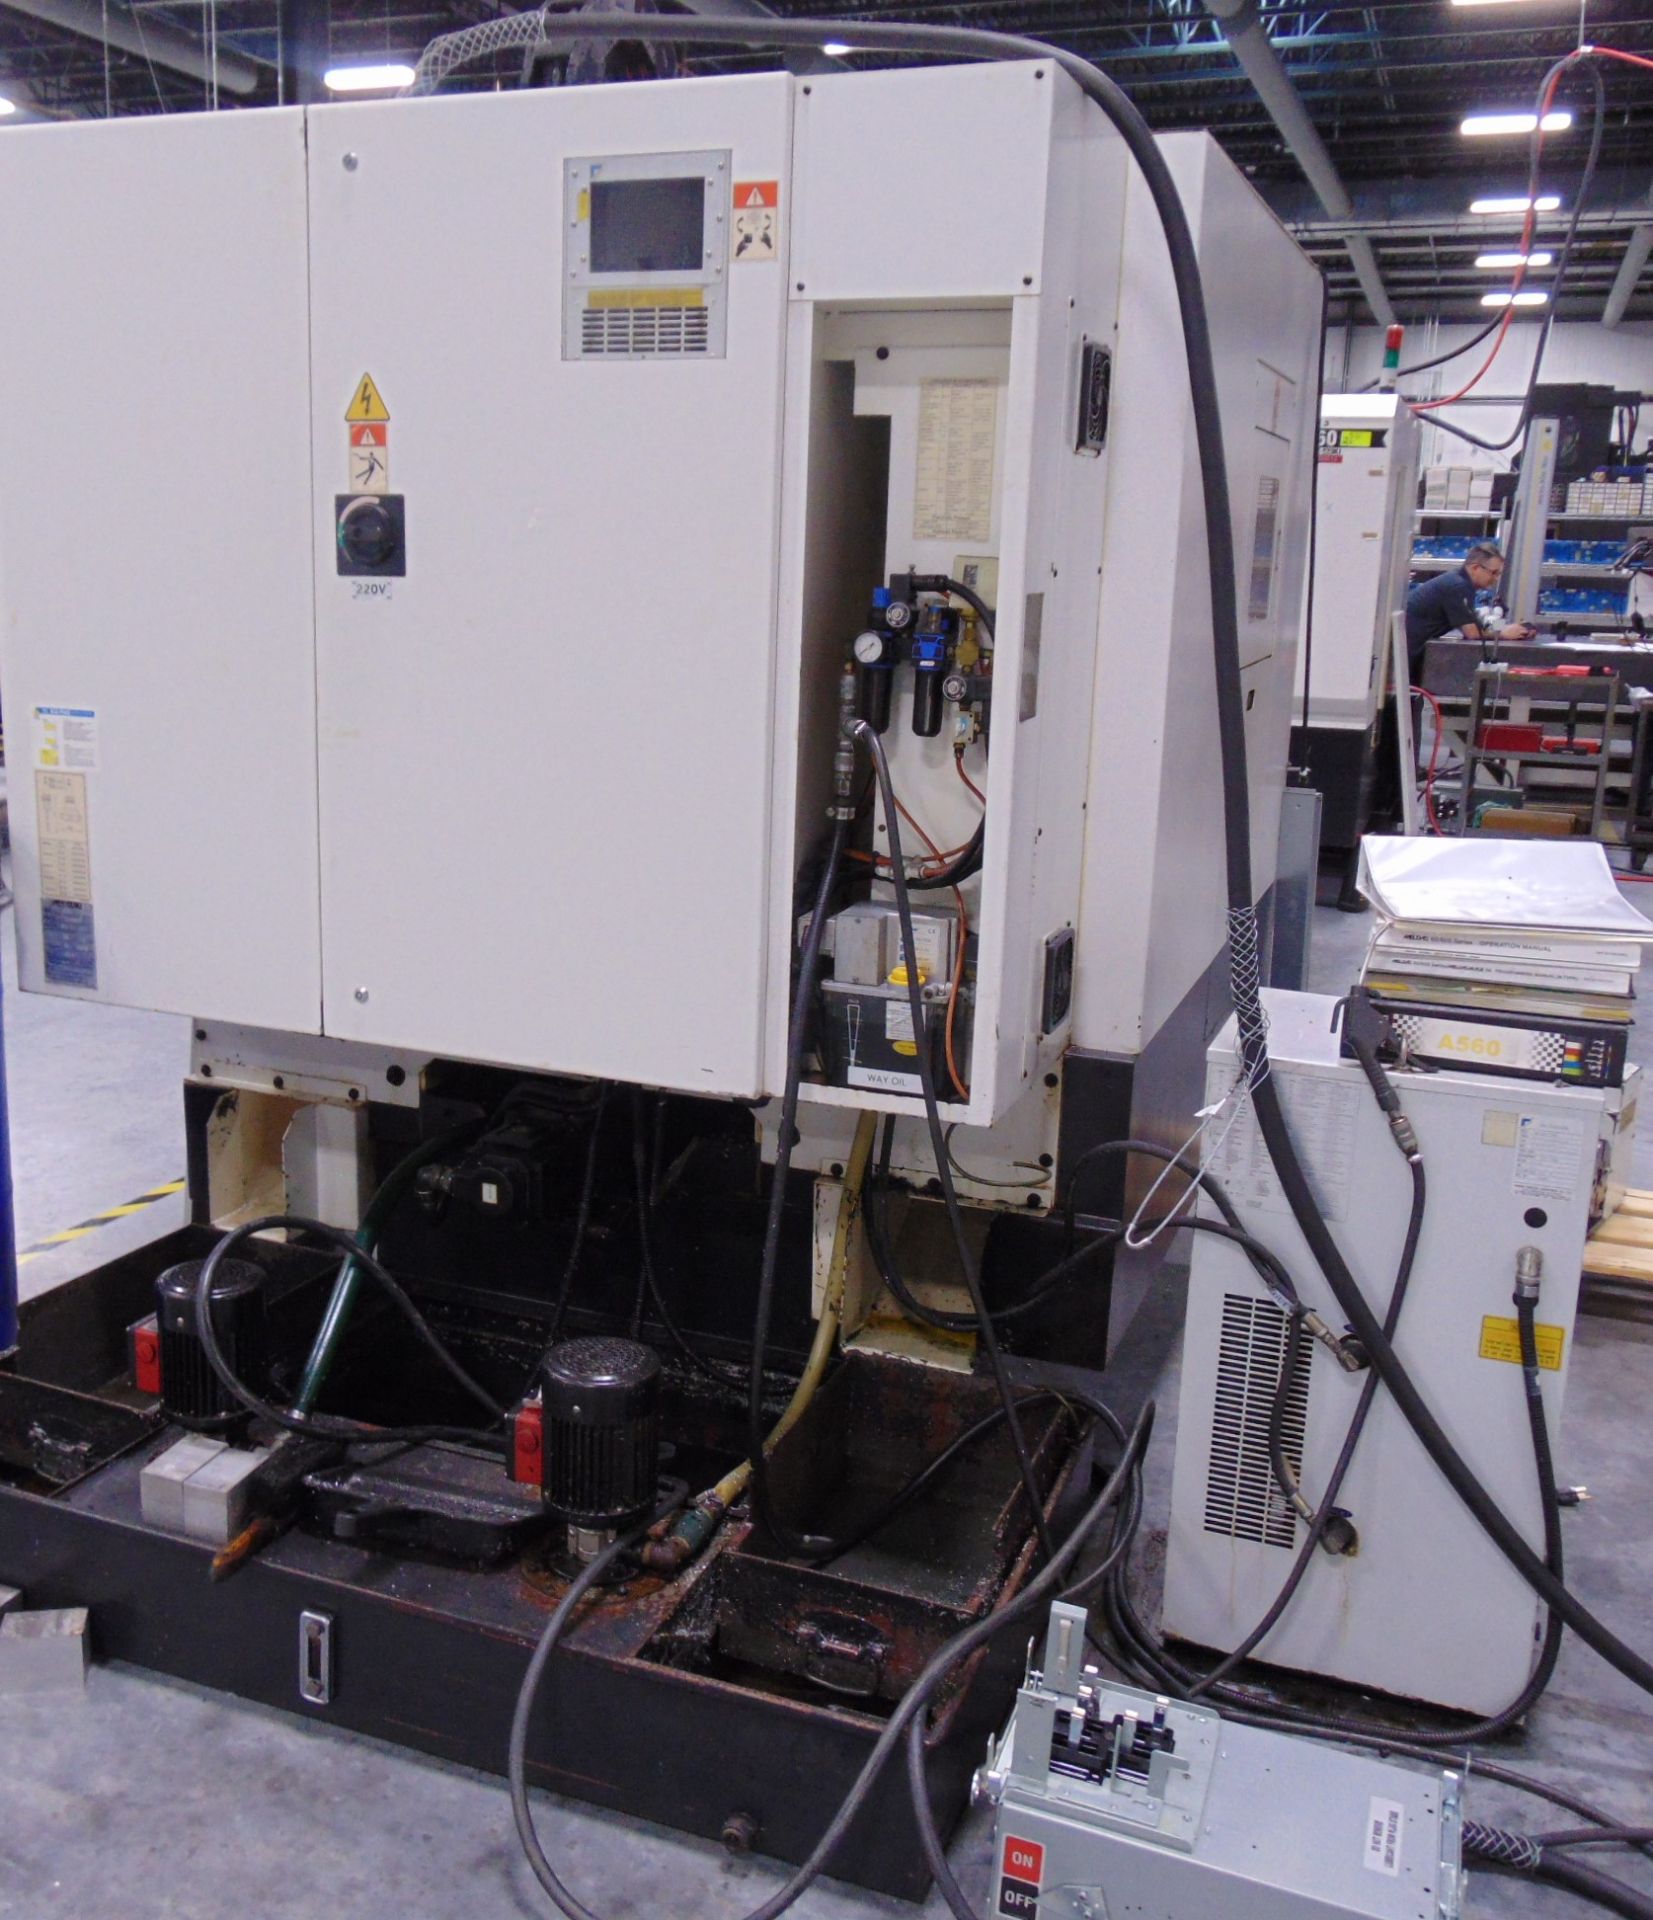 2007 ARES-SEIKI 3-AXIS CNC VERTICAL HIGH-SPEED DRILL/TAP MACHINE, W/ GOLDEN SUN 4TH AXIS ROTARY TABL - Image 8 of 15